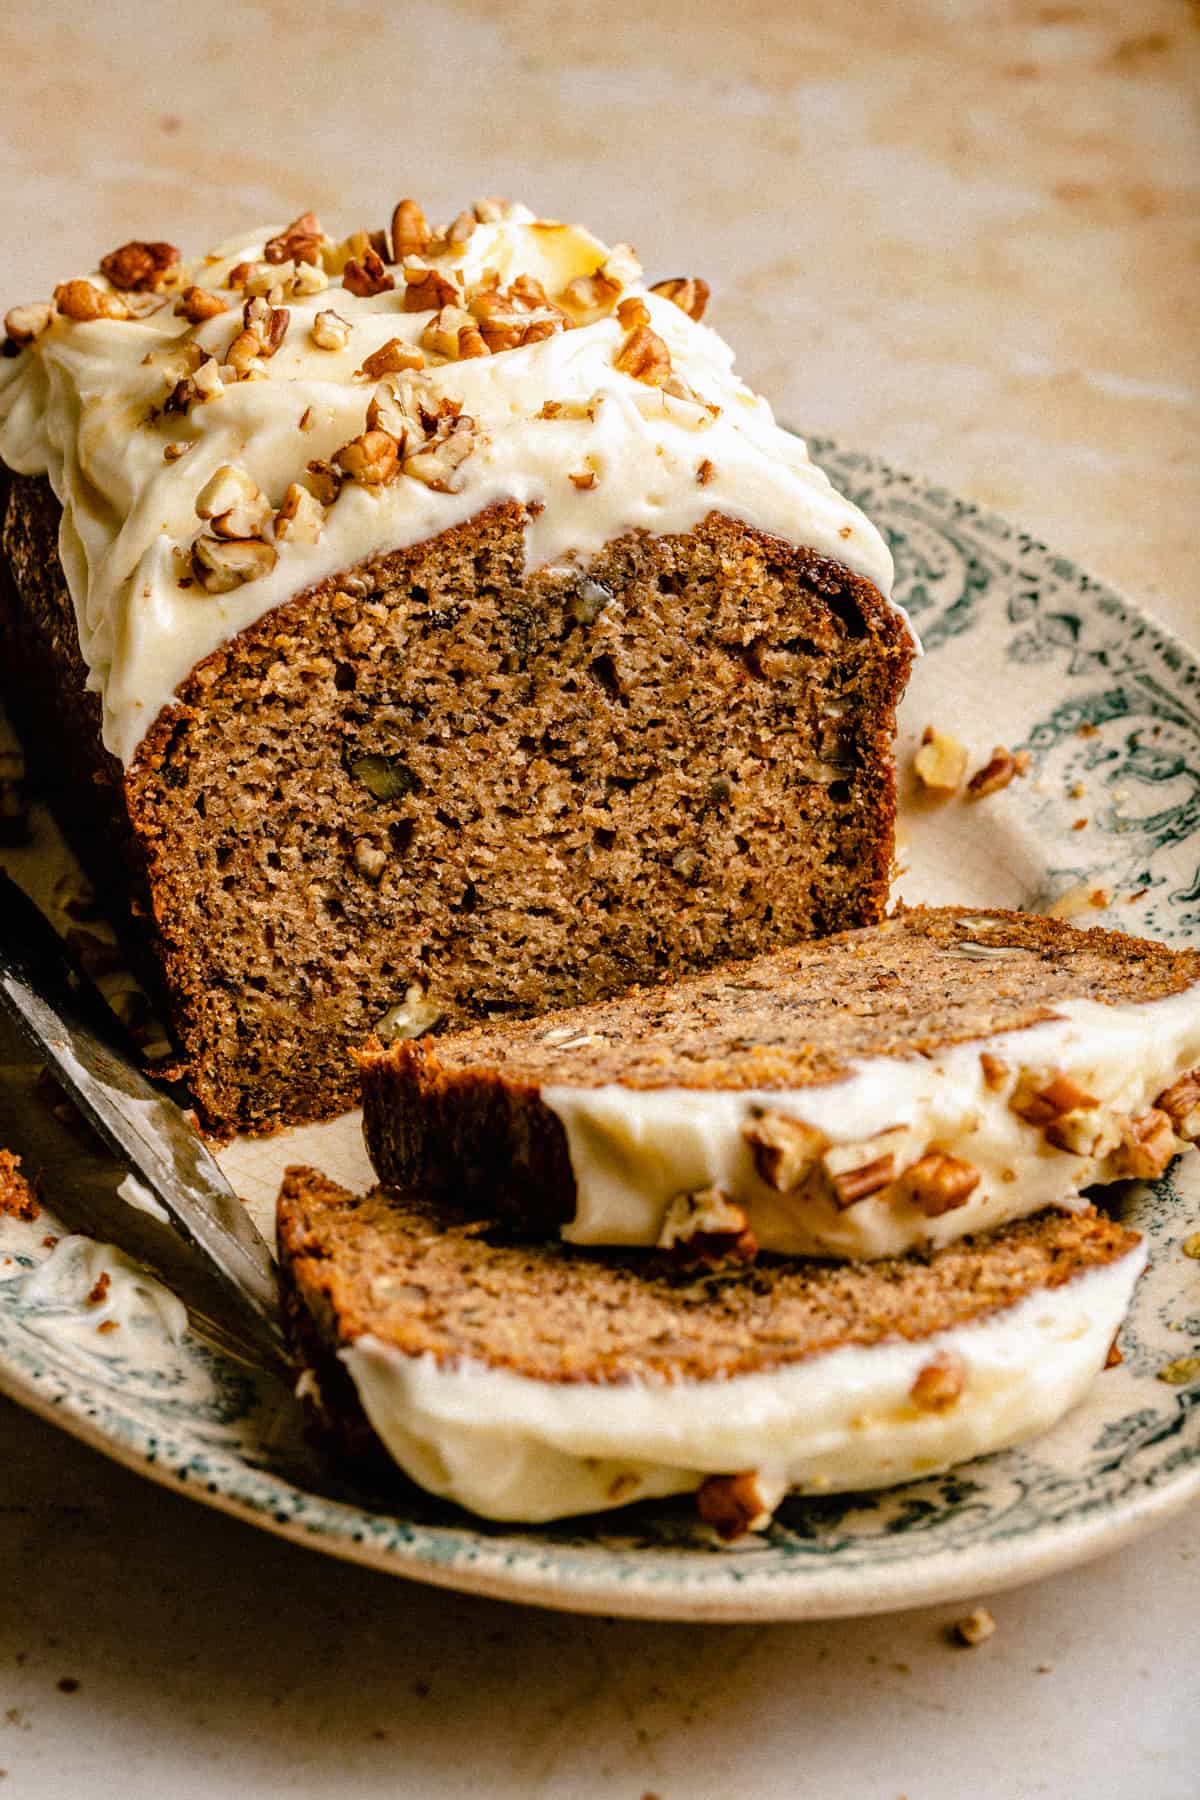 Banana Pecan Bread on a platter with a few slices cut showing the insides.